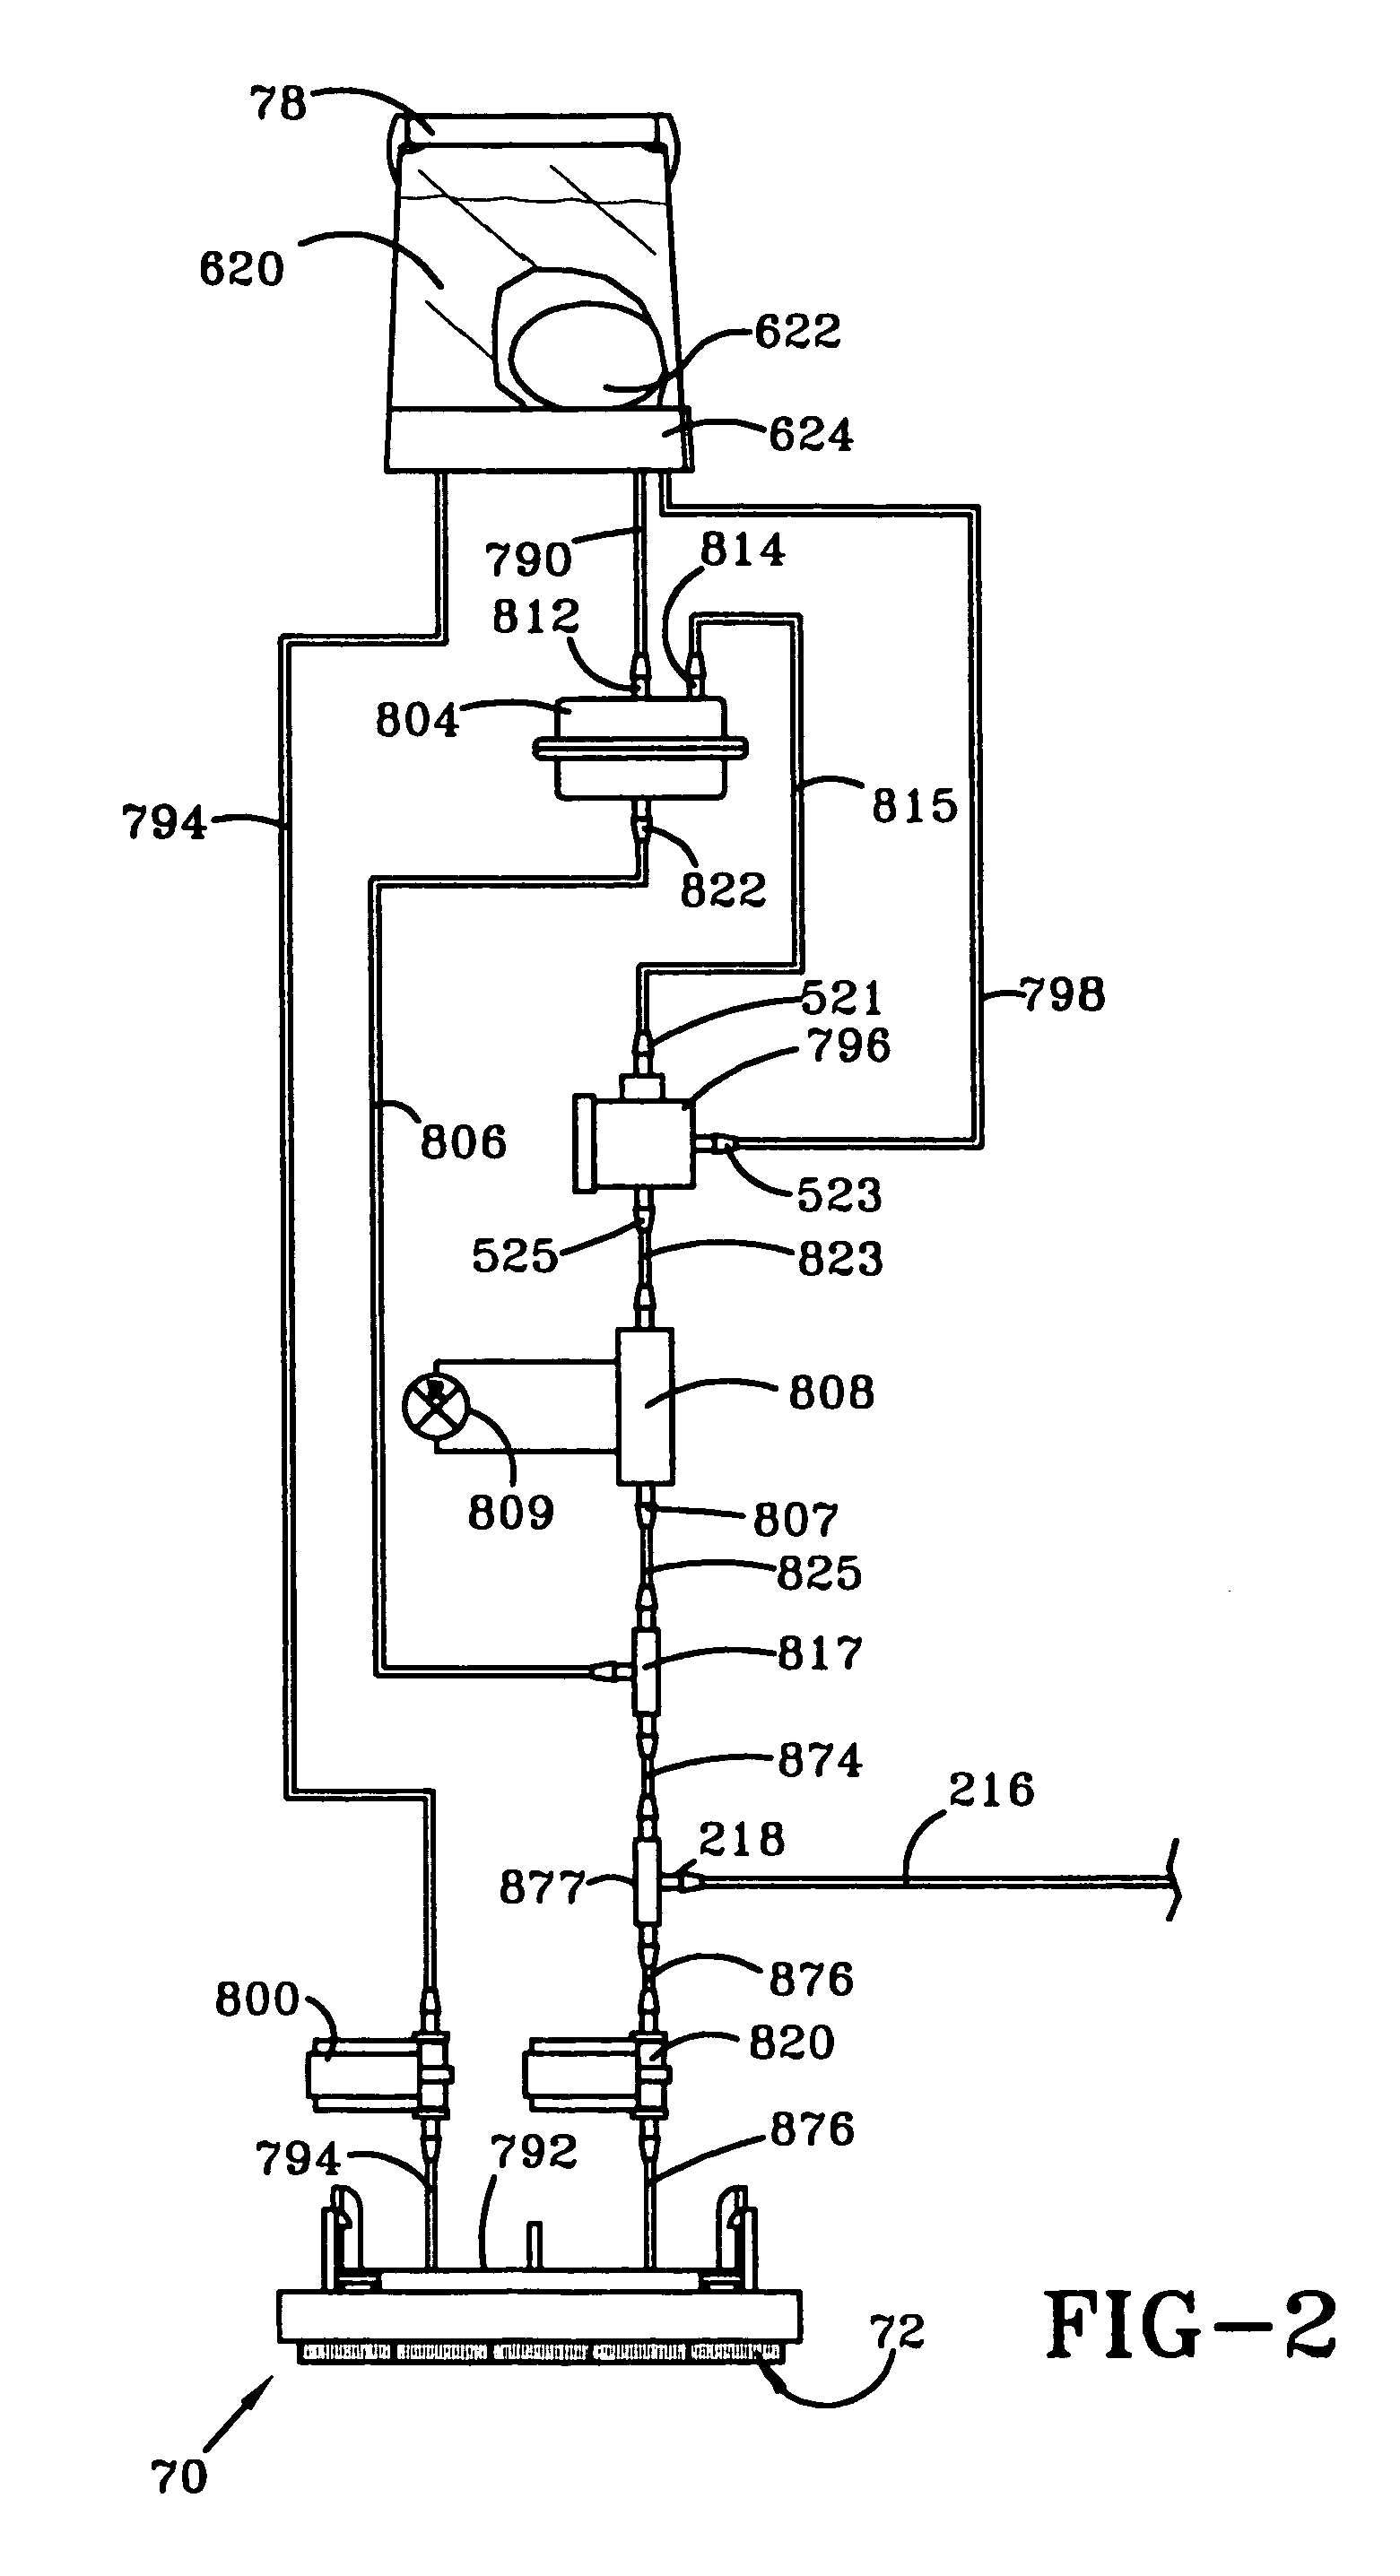 Solution distribution arrangement for a cleaning machine